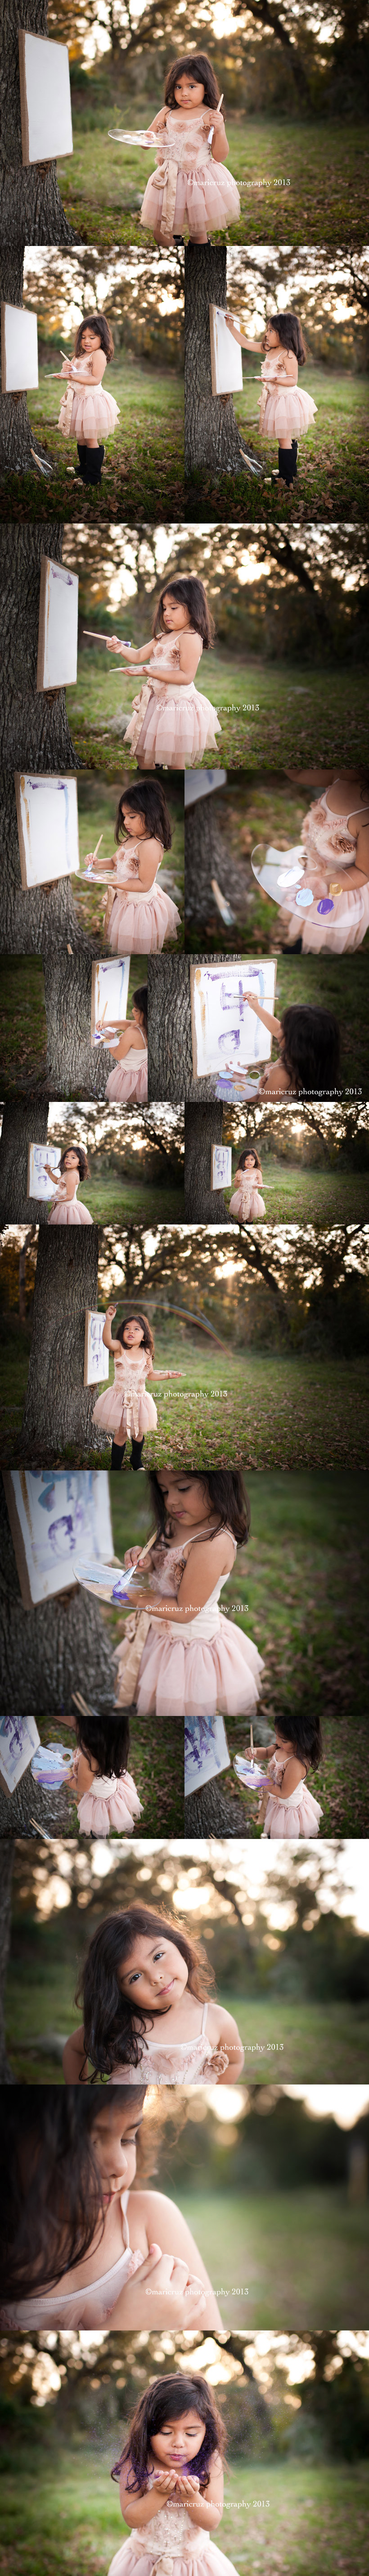 in pictures four | Houston TX Child Photographer